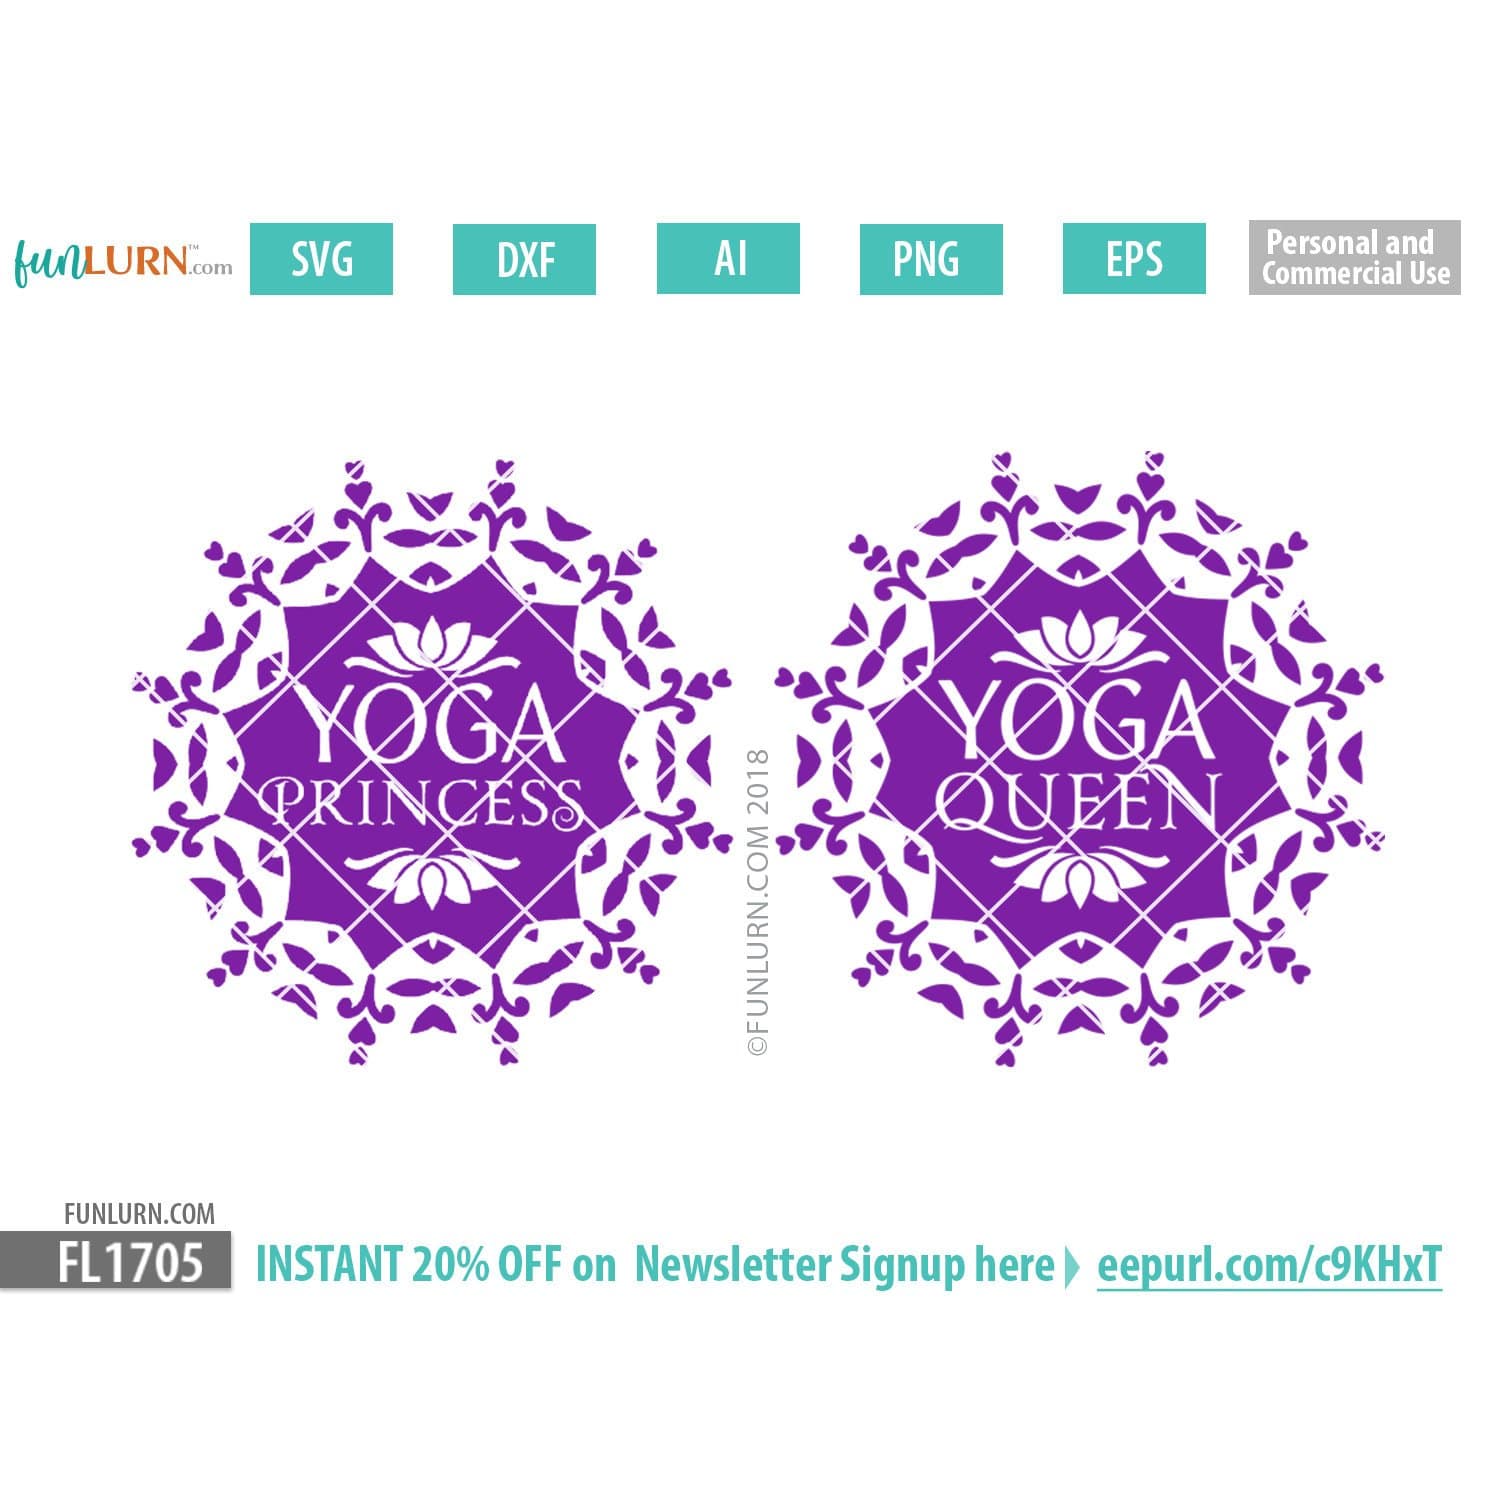 Yoga Tree Silhouettes AI EPS Vector & PNG